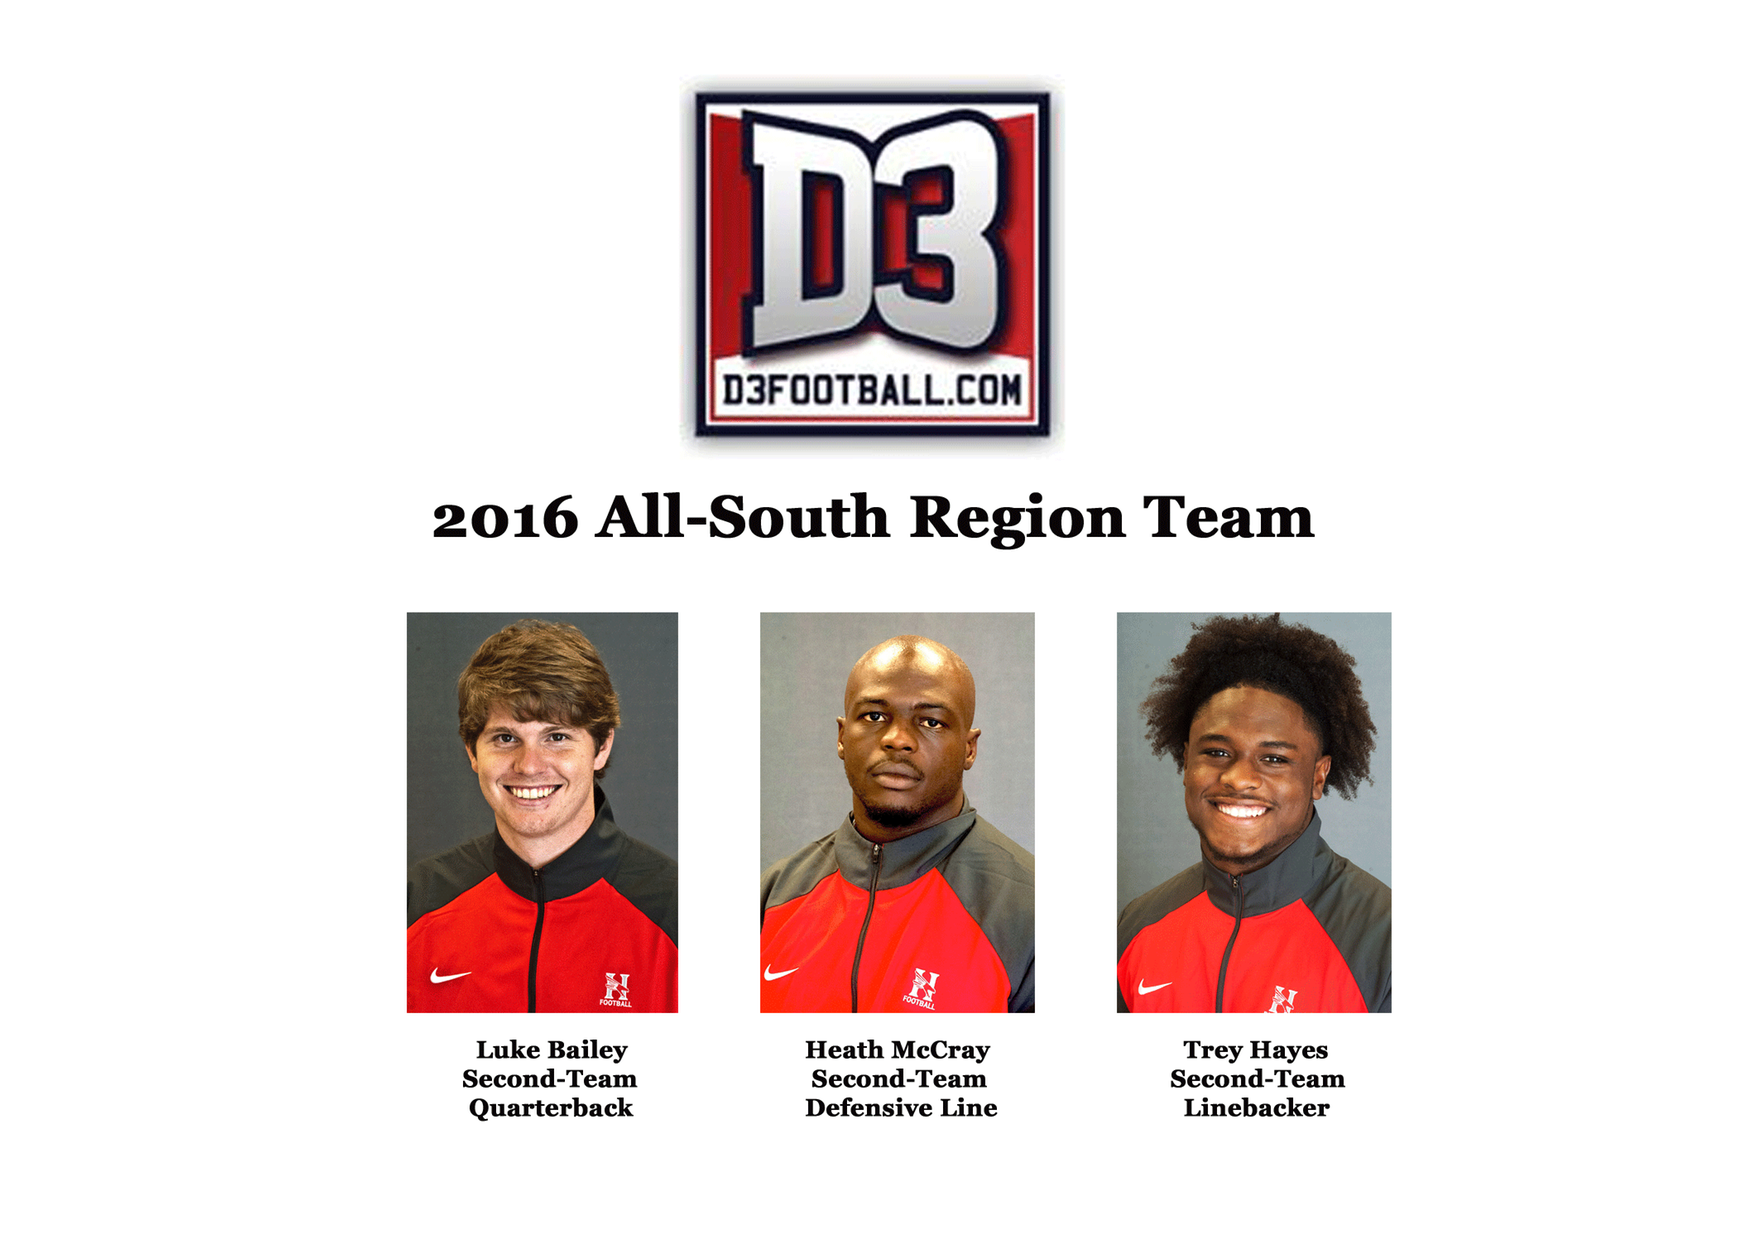 Bailey, McCray and Hayes earn All-Region honors